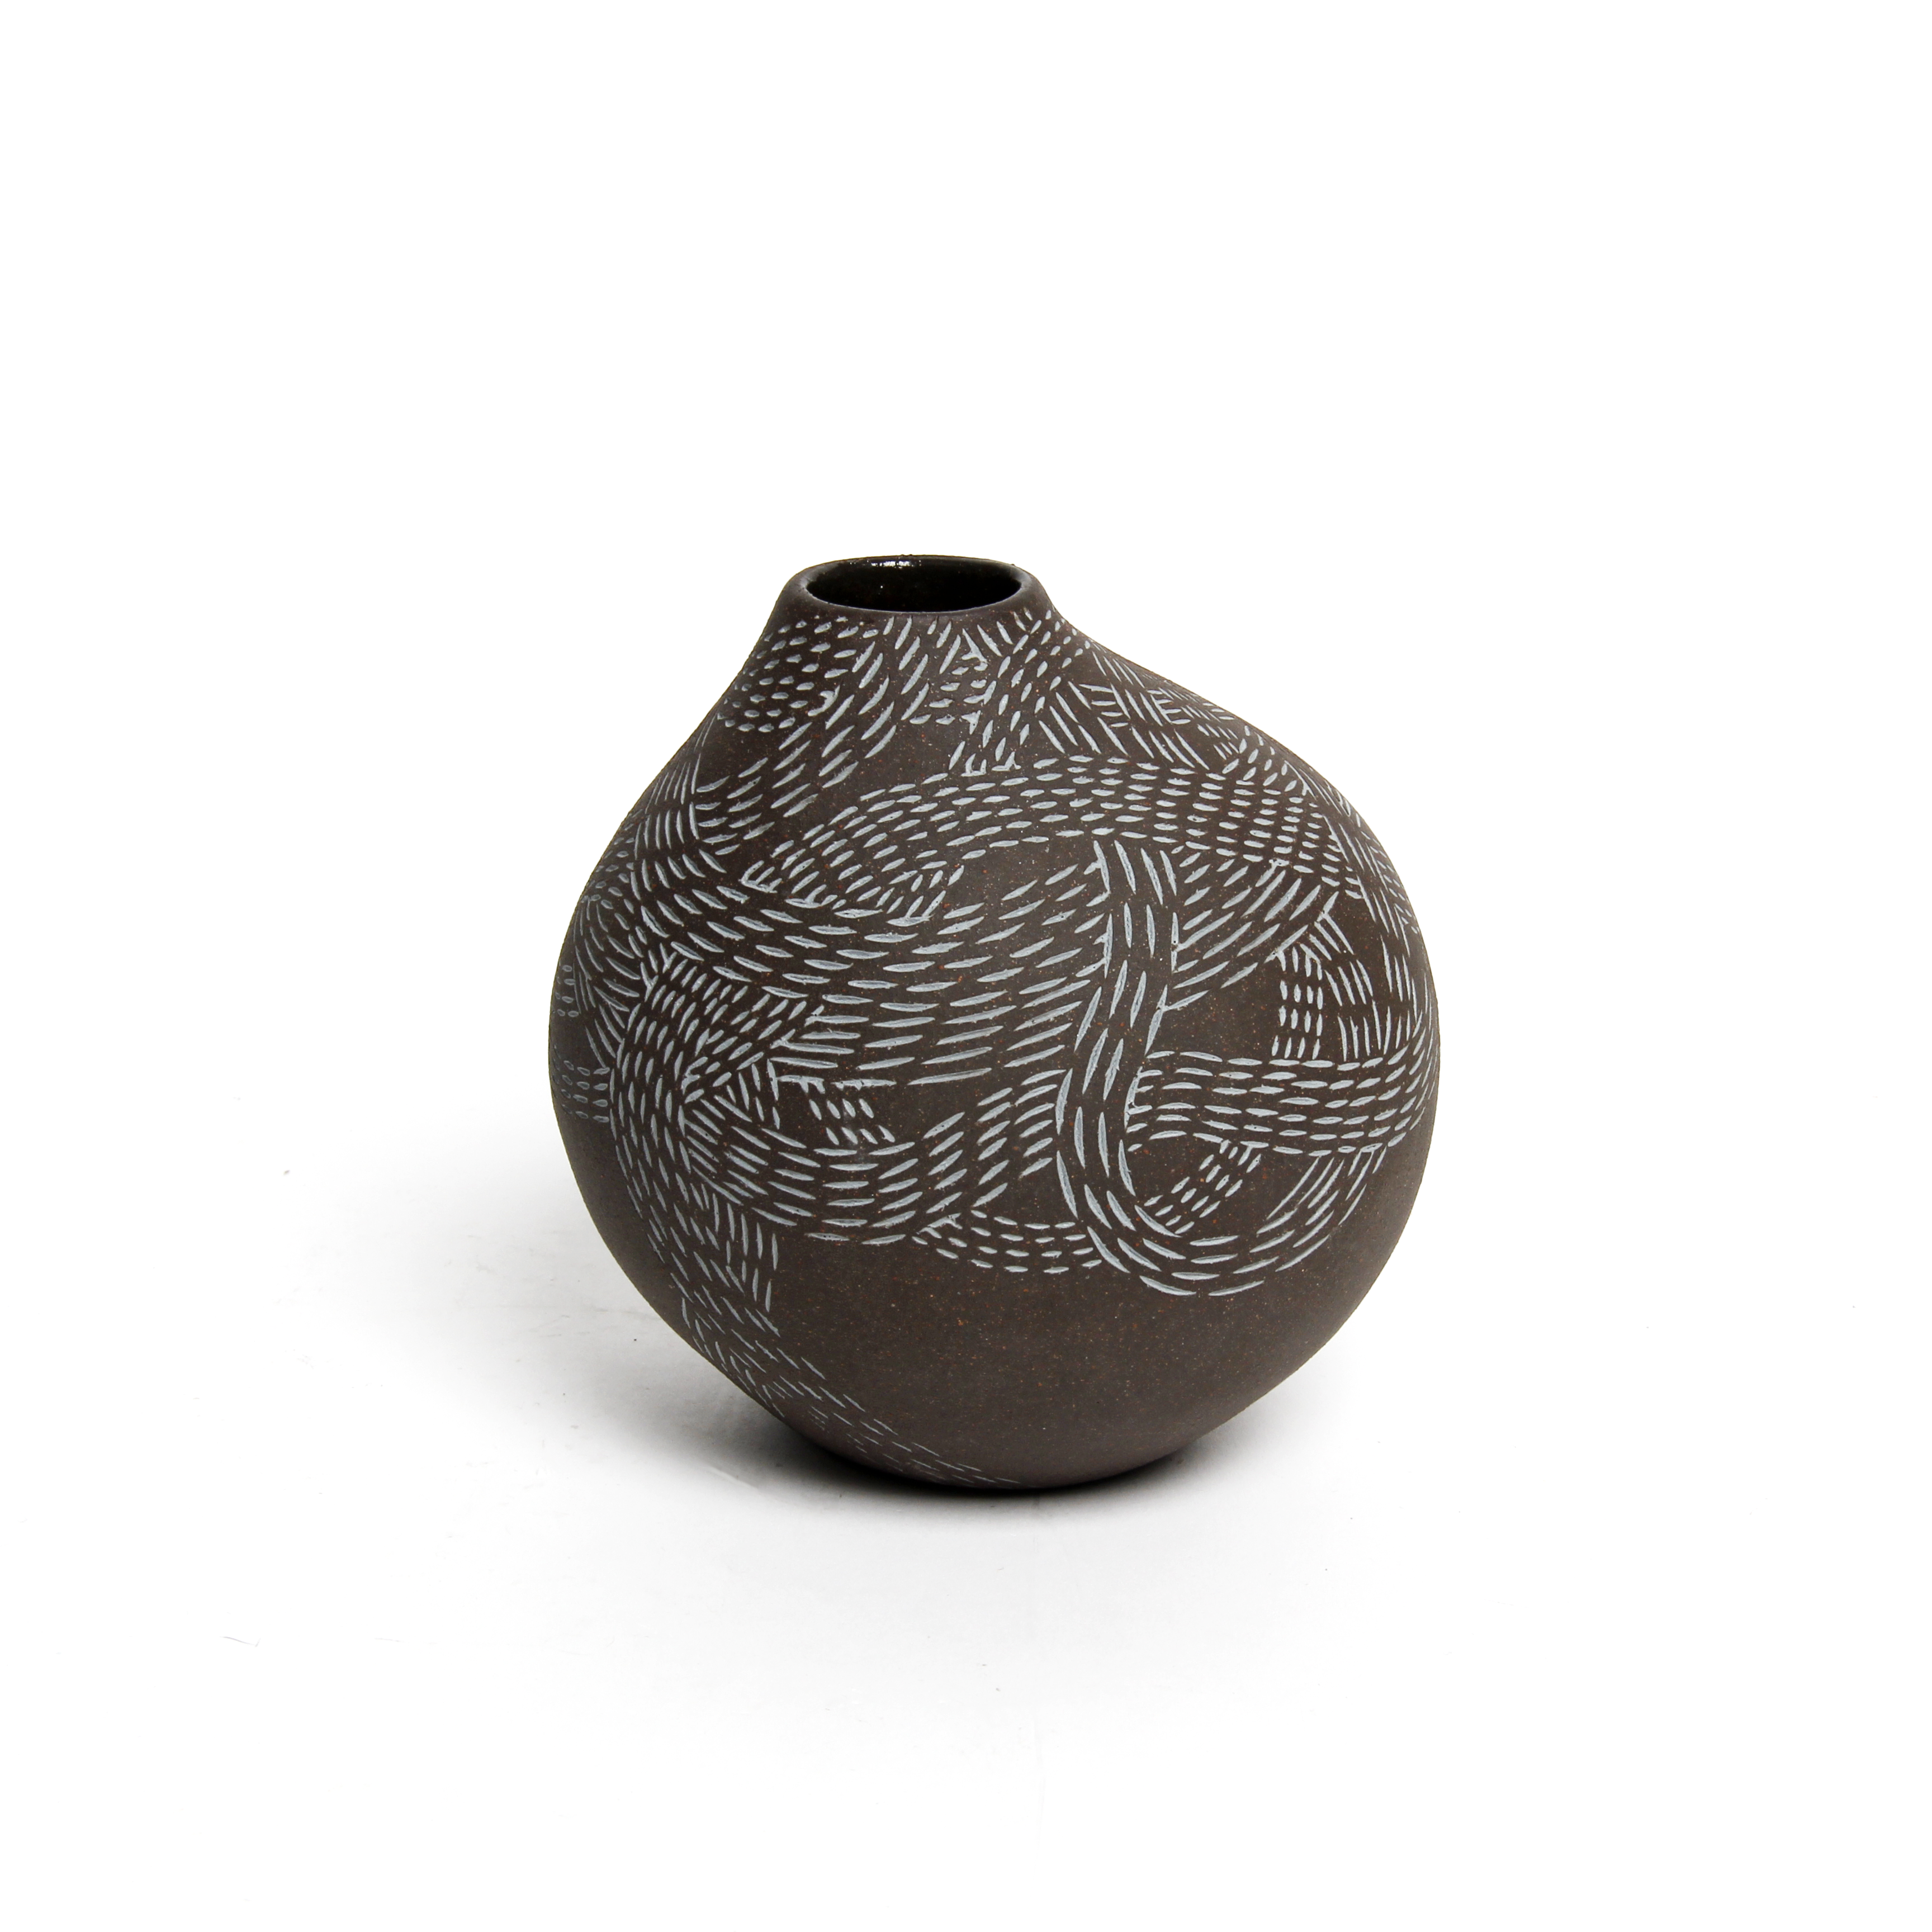 Talia Silva: Small Black and Blue Inlay Vessel (Each sold separately) Product Image 2 of 5